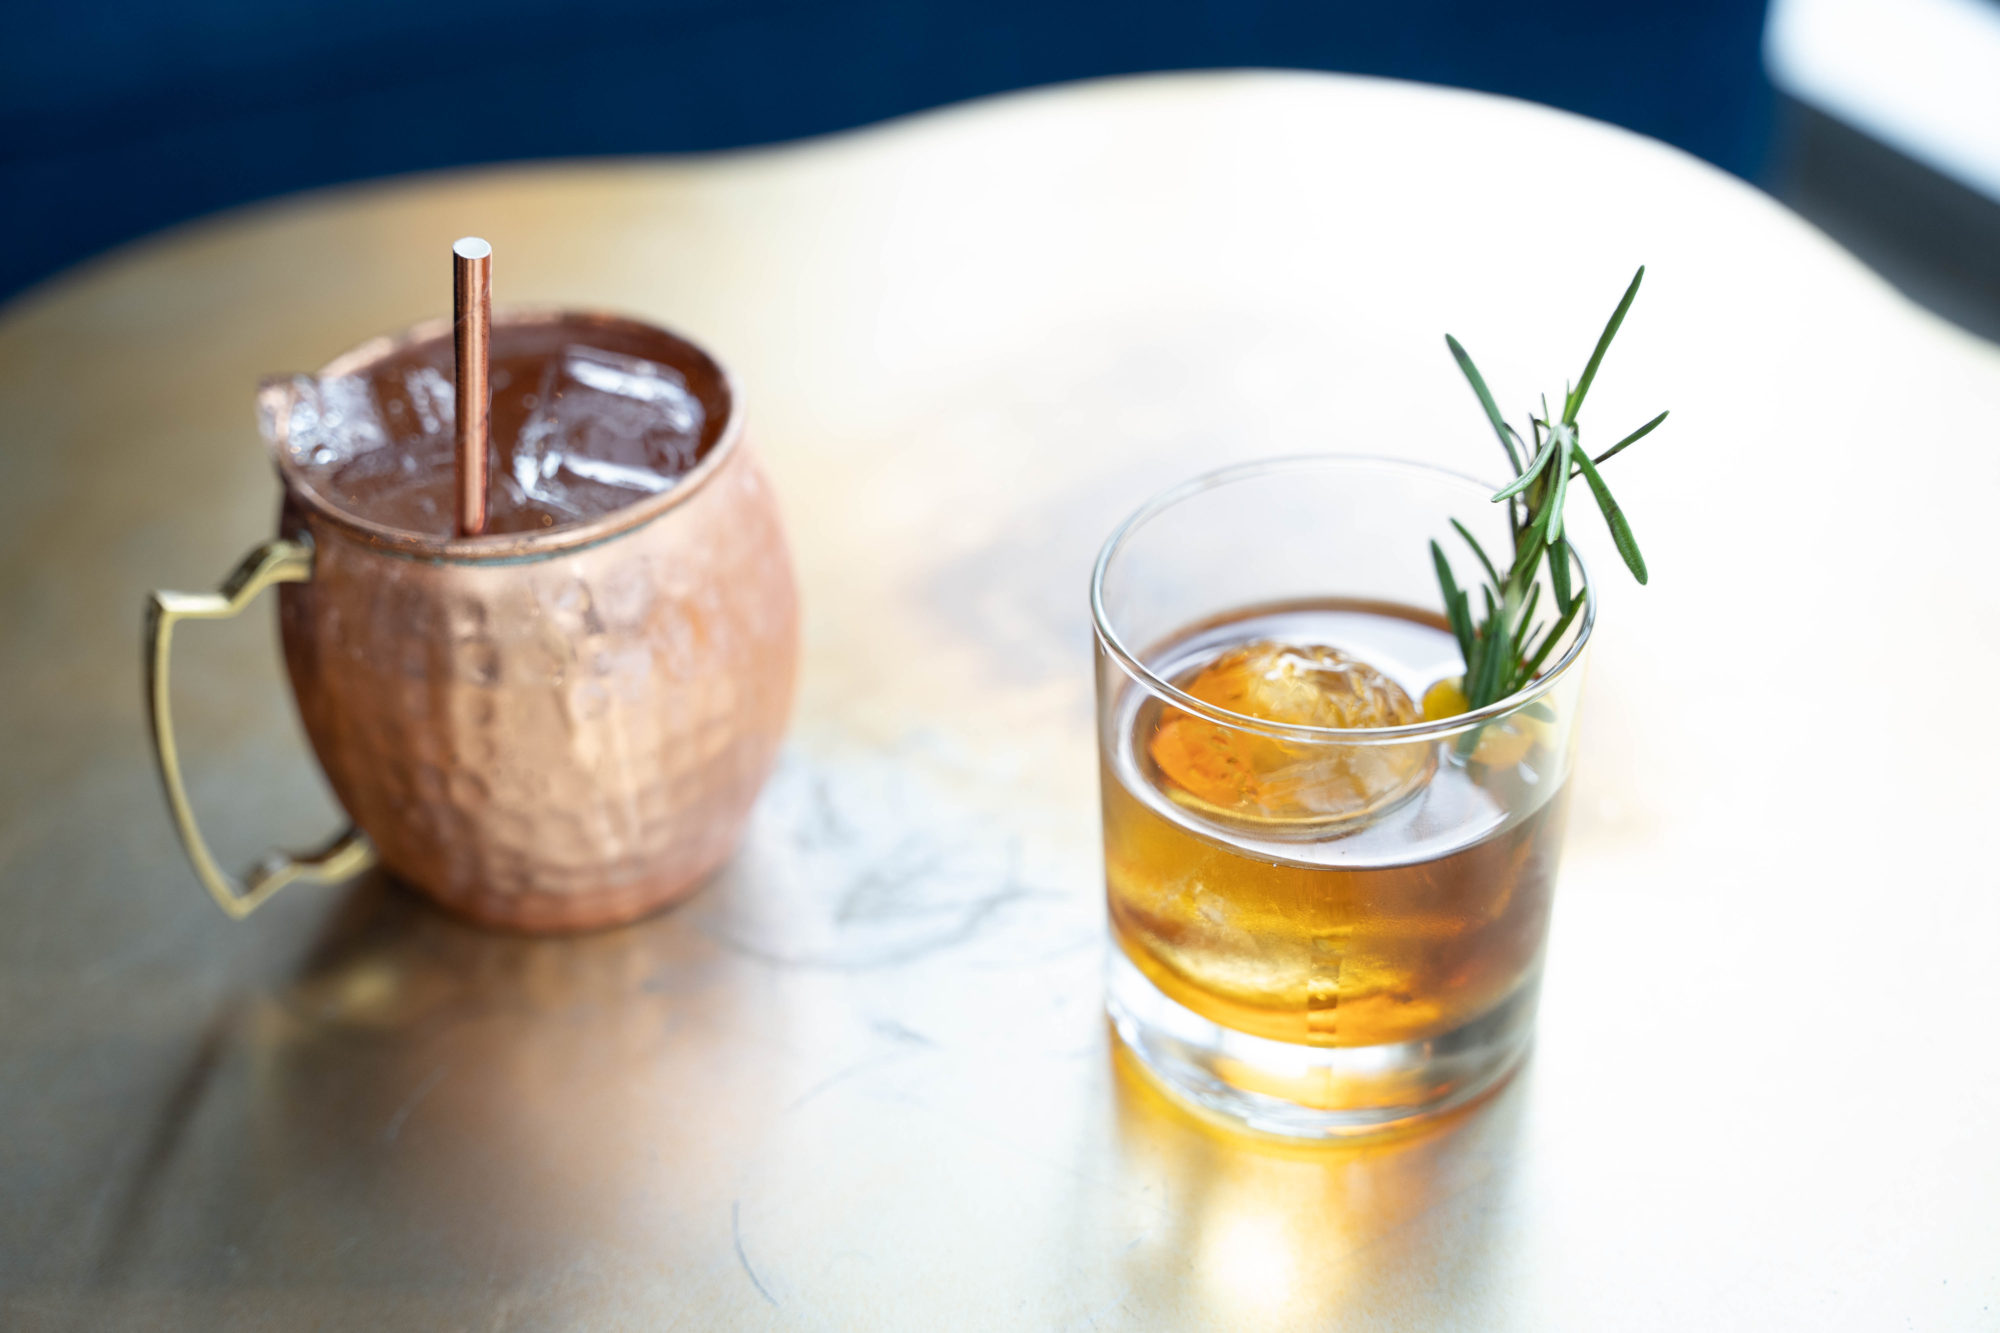 Two cocktails: a Moscow mule in a copper mug, and a bourbon/pear cocktail with a sprig of rosemary